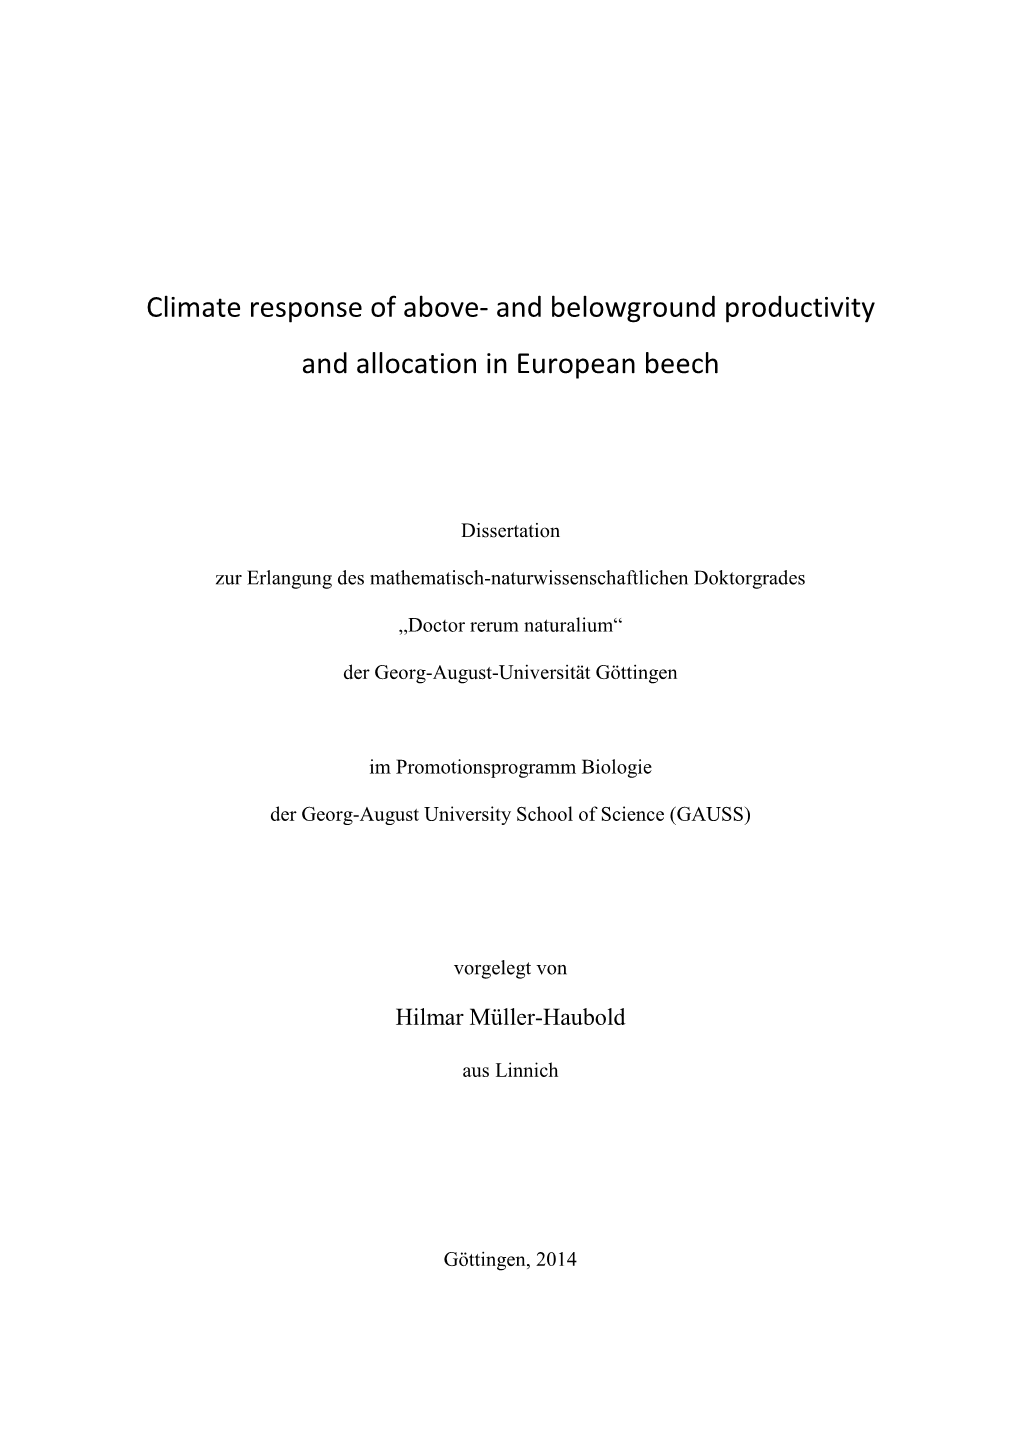 Climate Response of Above- and Belowground Productivity